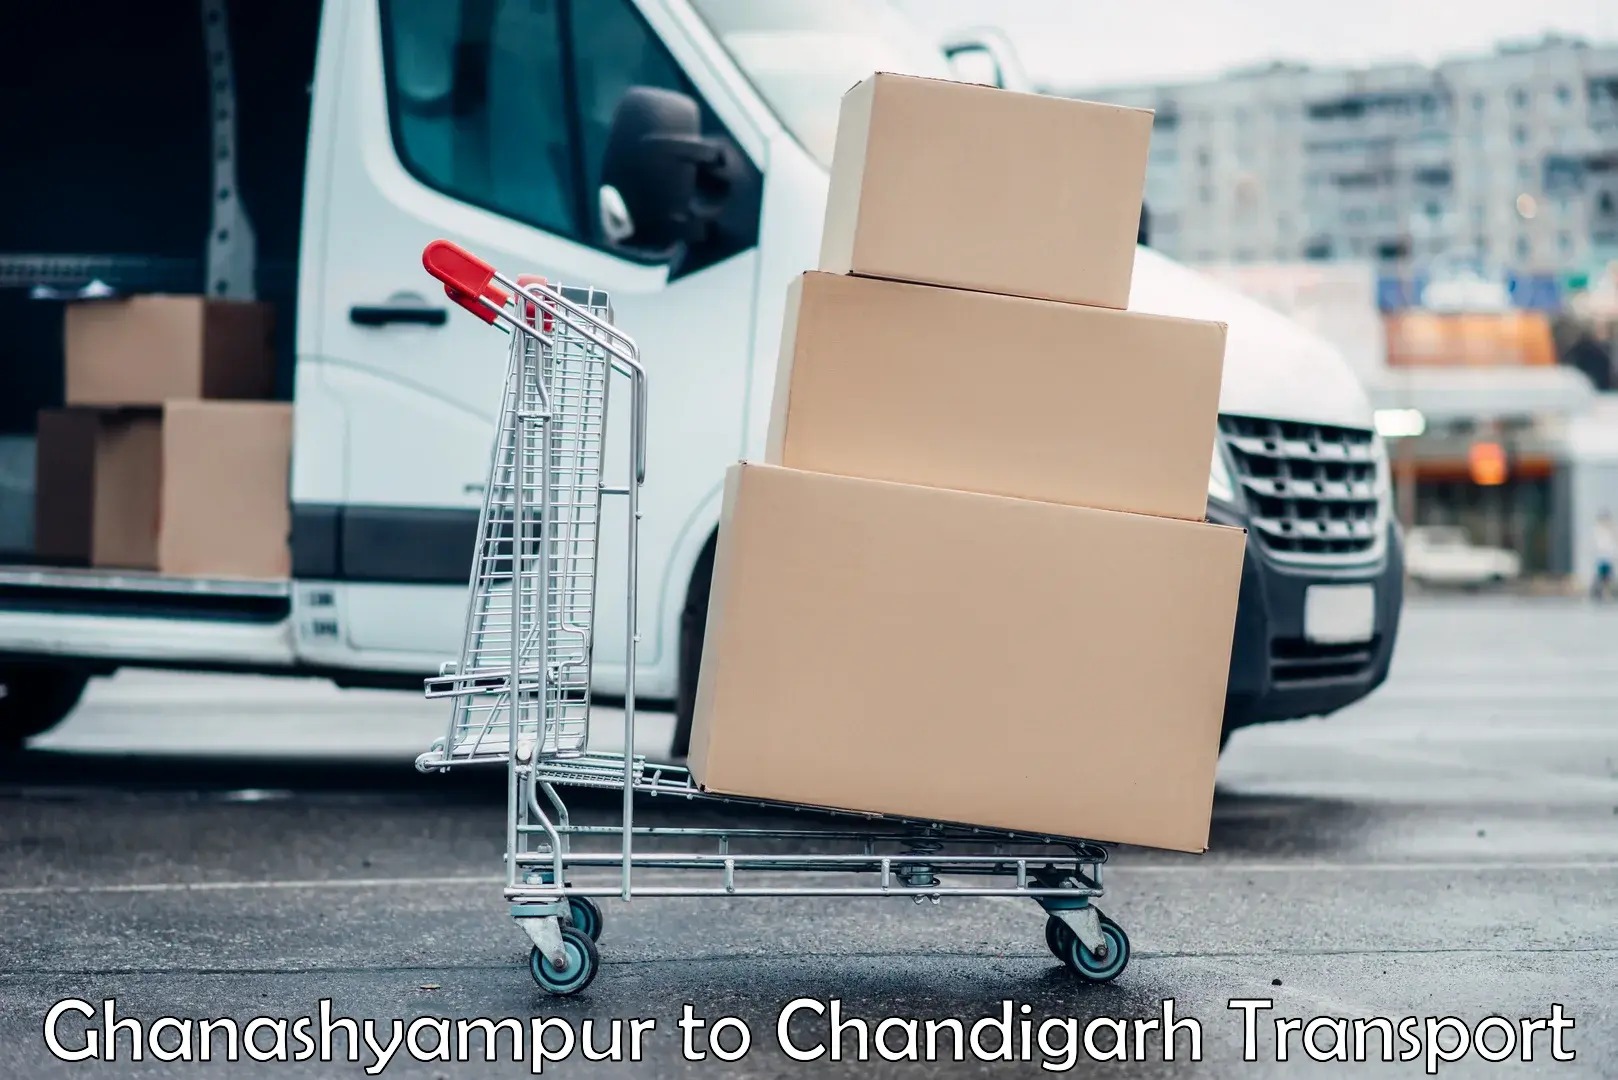 Nationwide transport services Ghanashyampur to Chandigarh